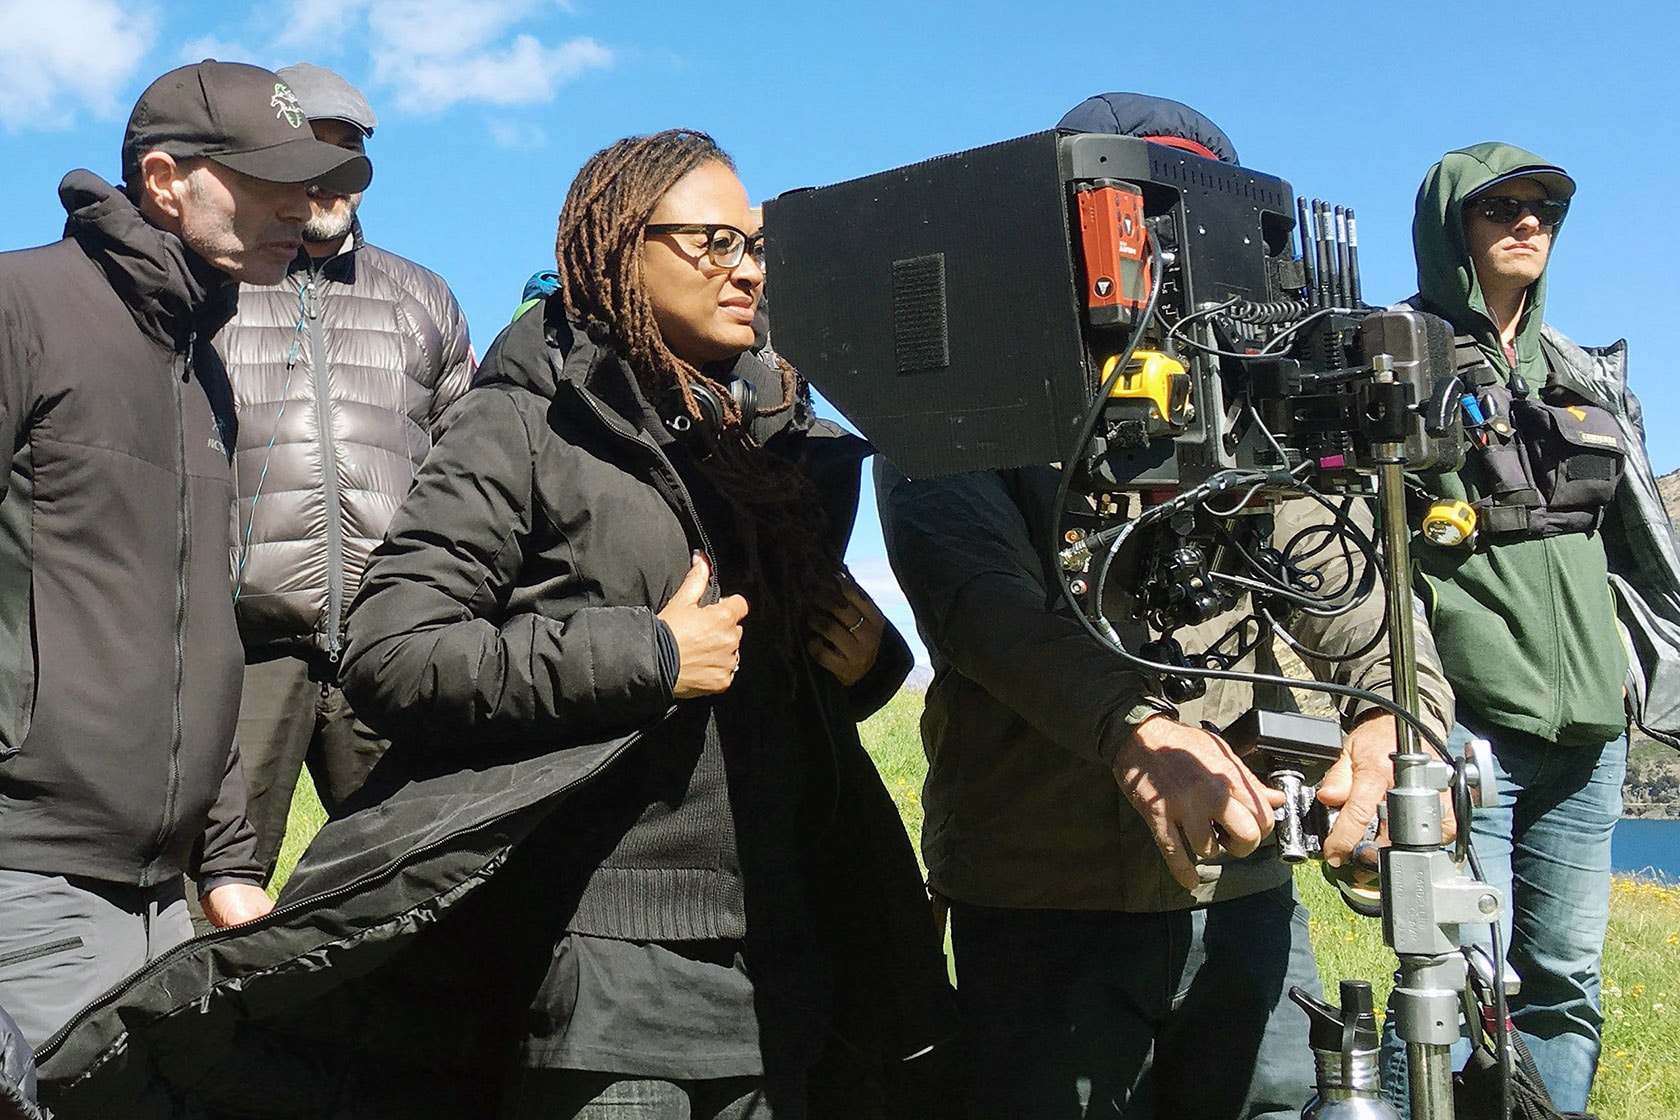 Ava DuVernay Directing DC Comics New Gods Movie Movie Universe Justice League A Wrinkle in Time Darkseid Big Barda Wonder Woman Patty Jenkins Selma Queen Sugar 13th Orion Mister Miracle